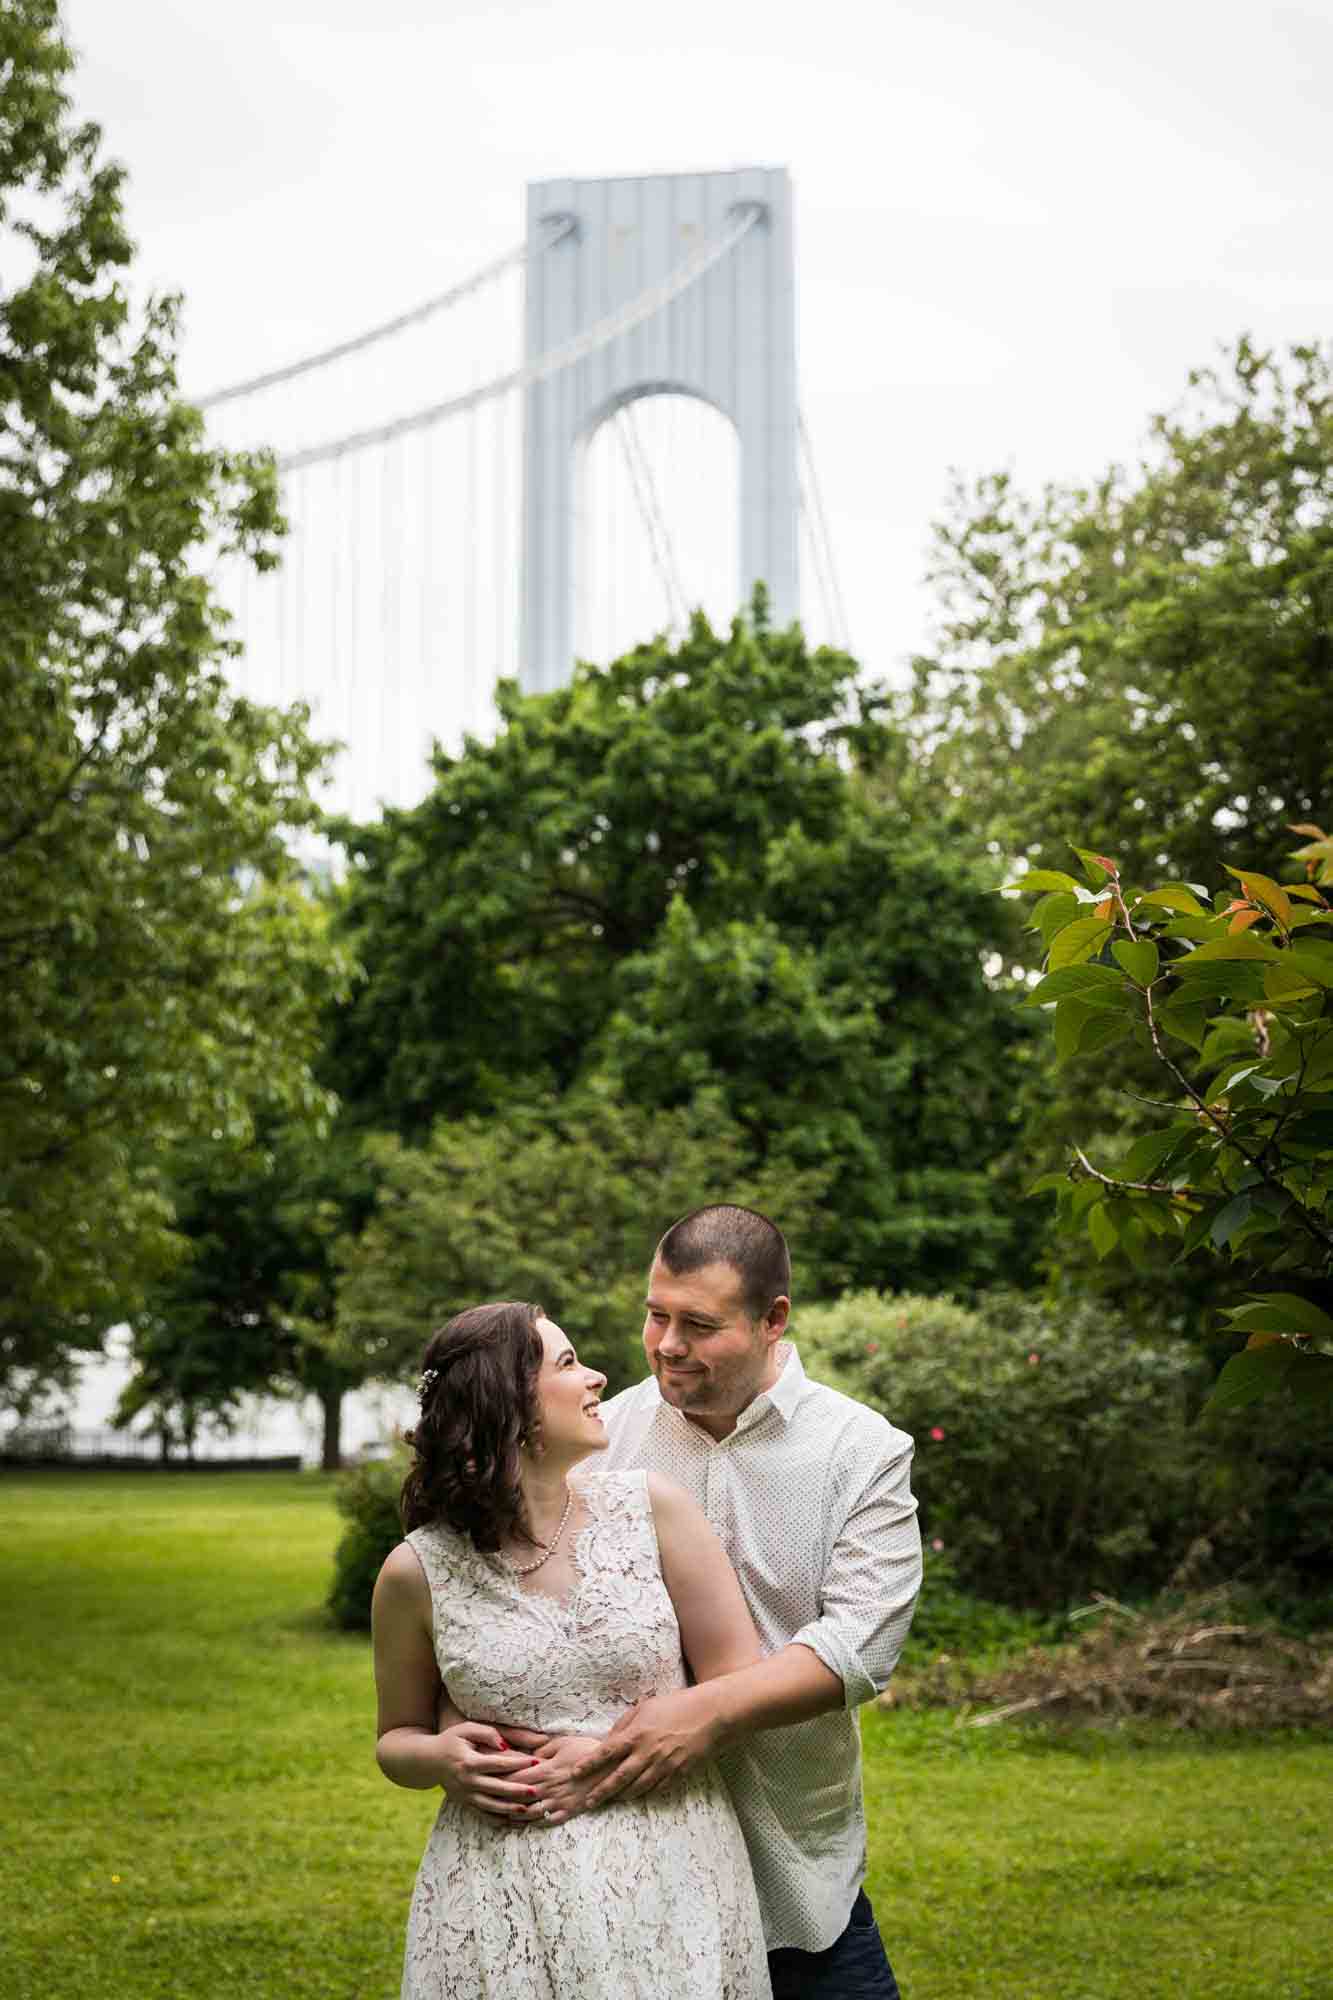 Couple hugging in park with Verrazano Bridge in background during a Bay Ridge engagement shoot